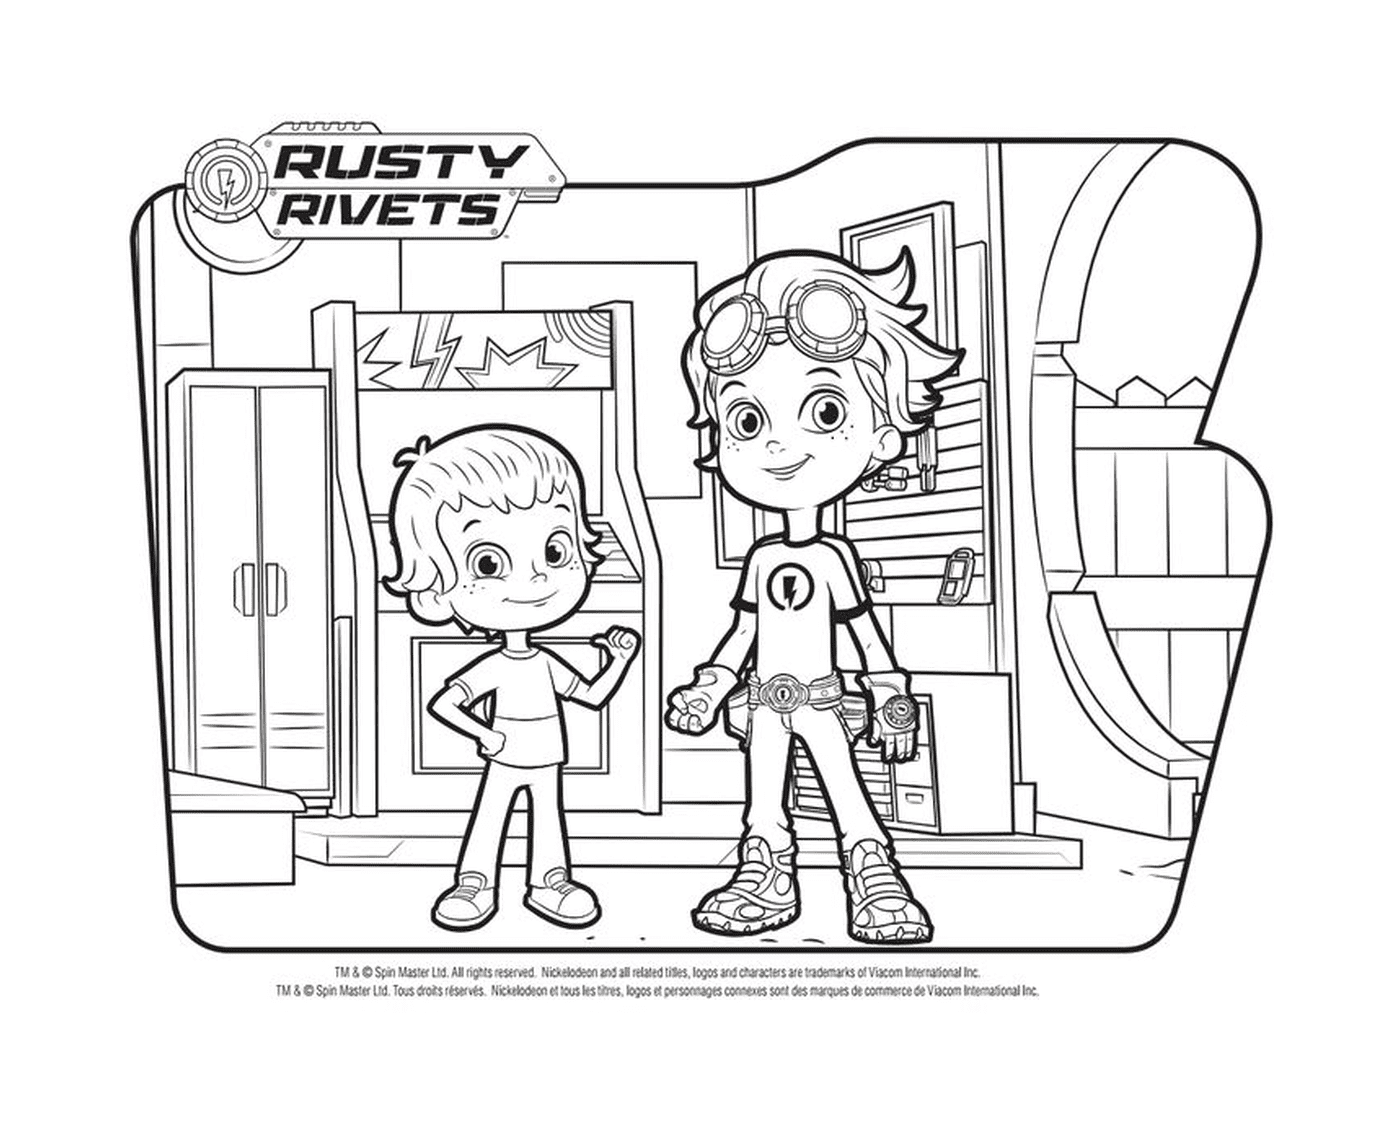  Boy and daughter of Rusty Rivets 